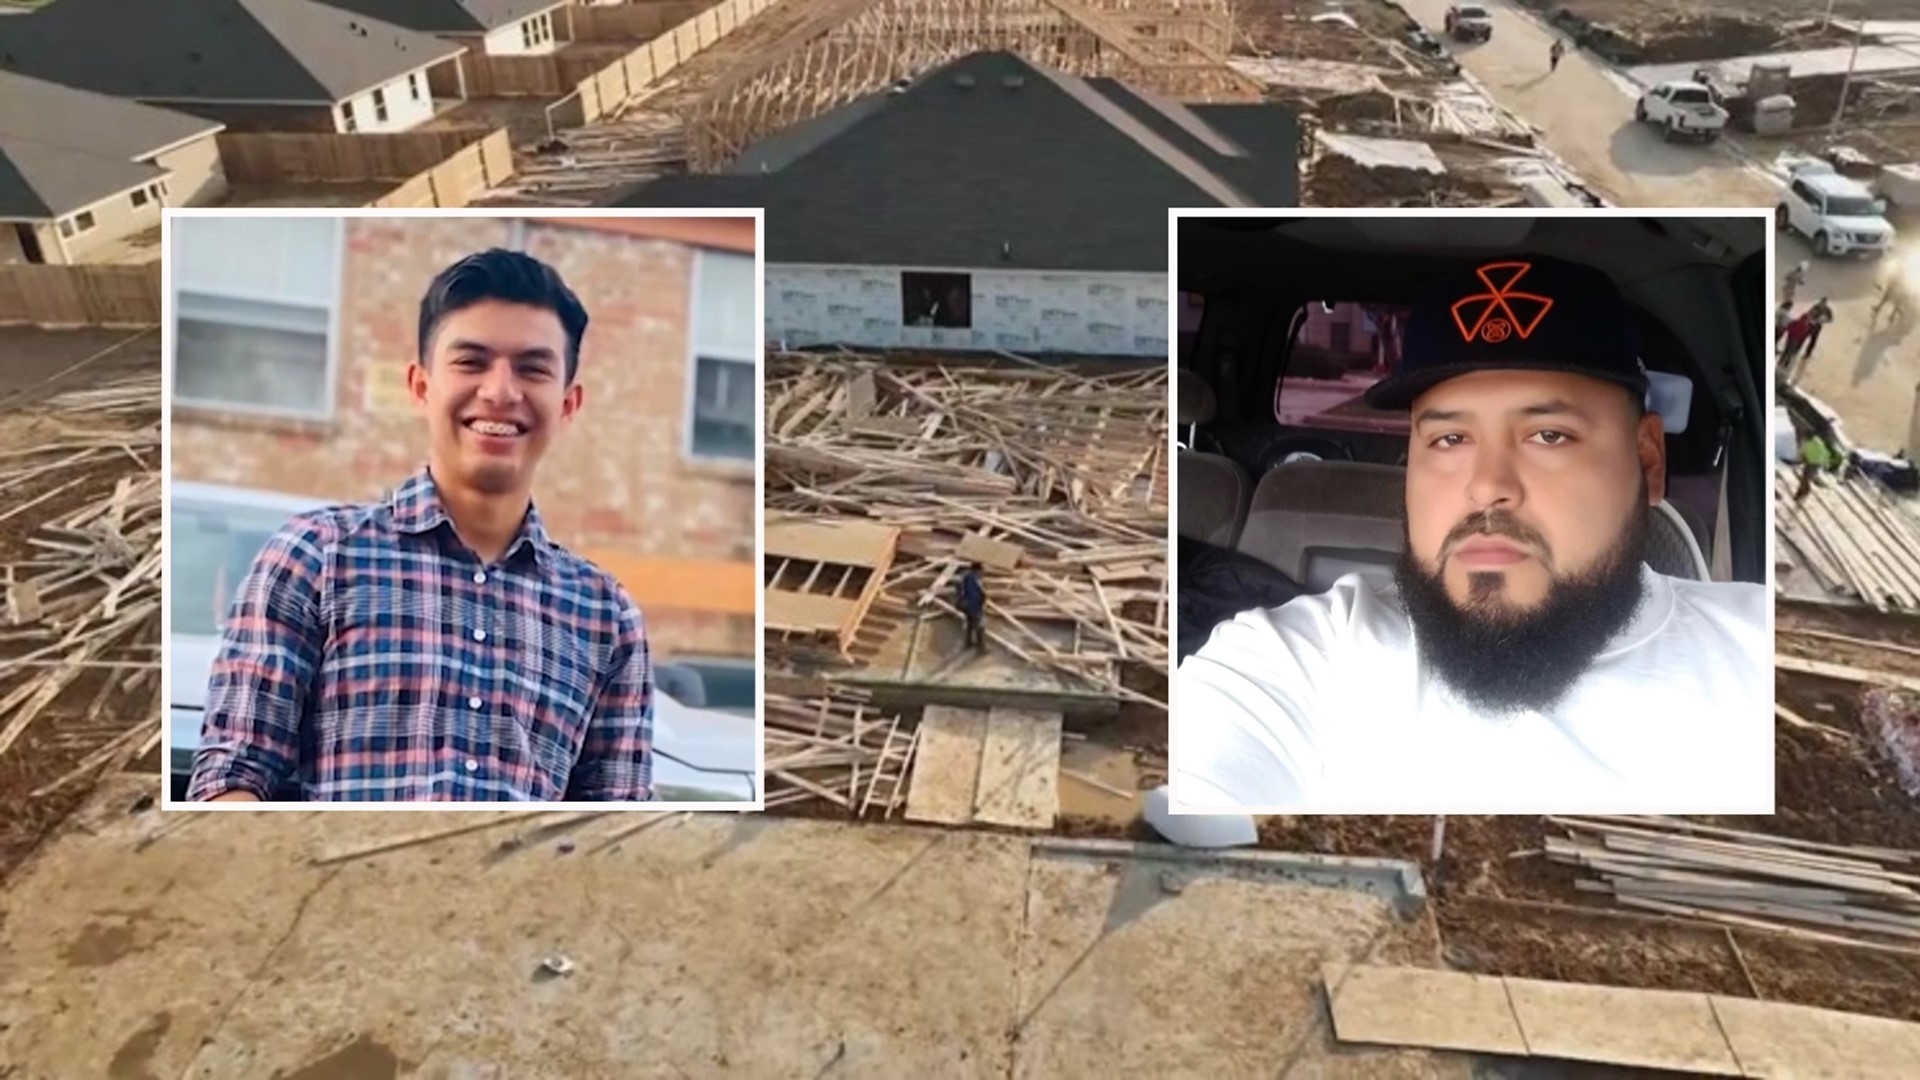 Brayan Rubi Lopez Aguilar and Angel Gumaro Huerta Pedraza were killed and several others were injured when a house under construction collapsed Tuesday.